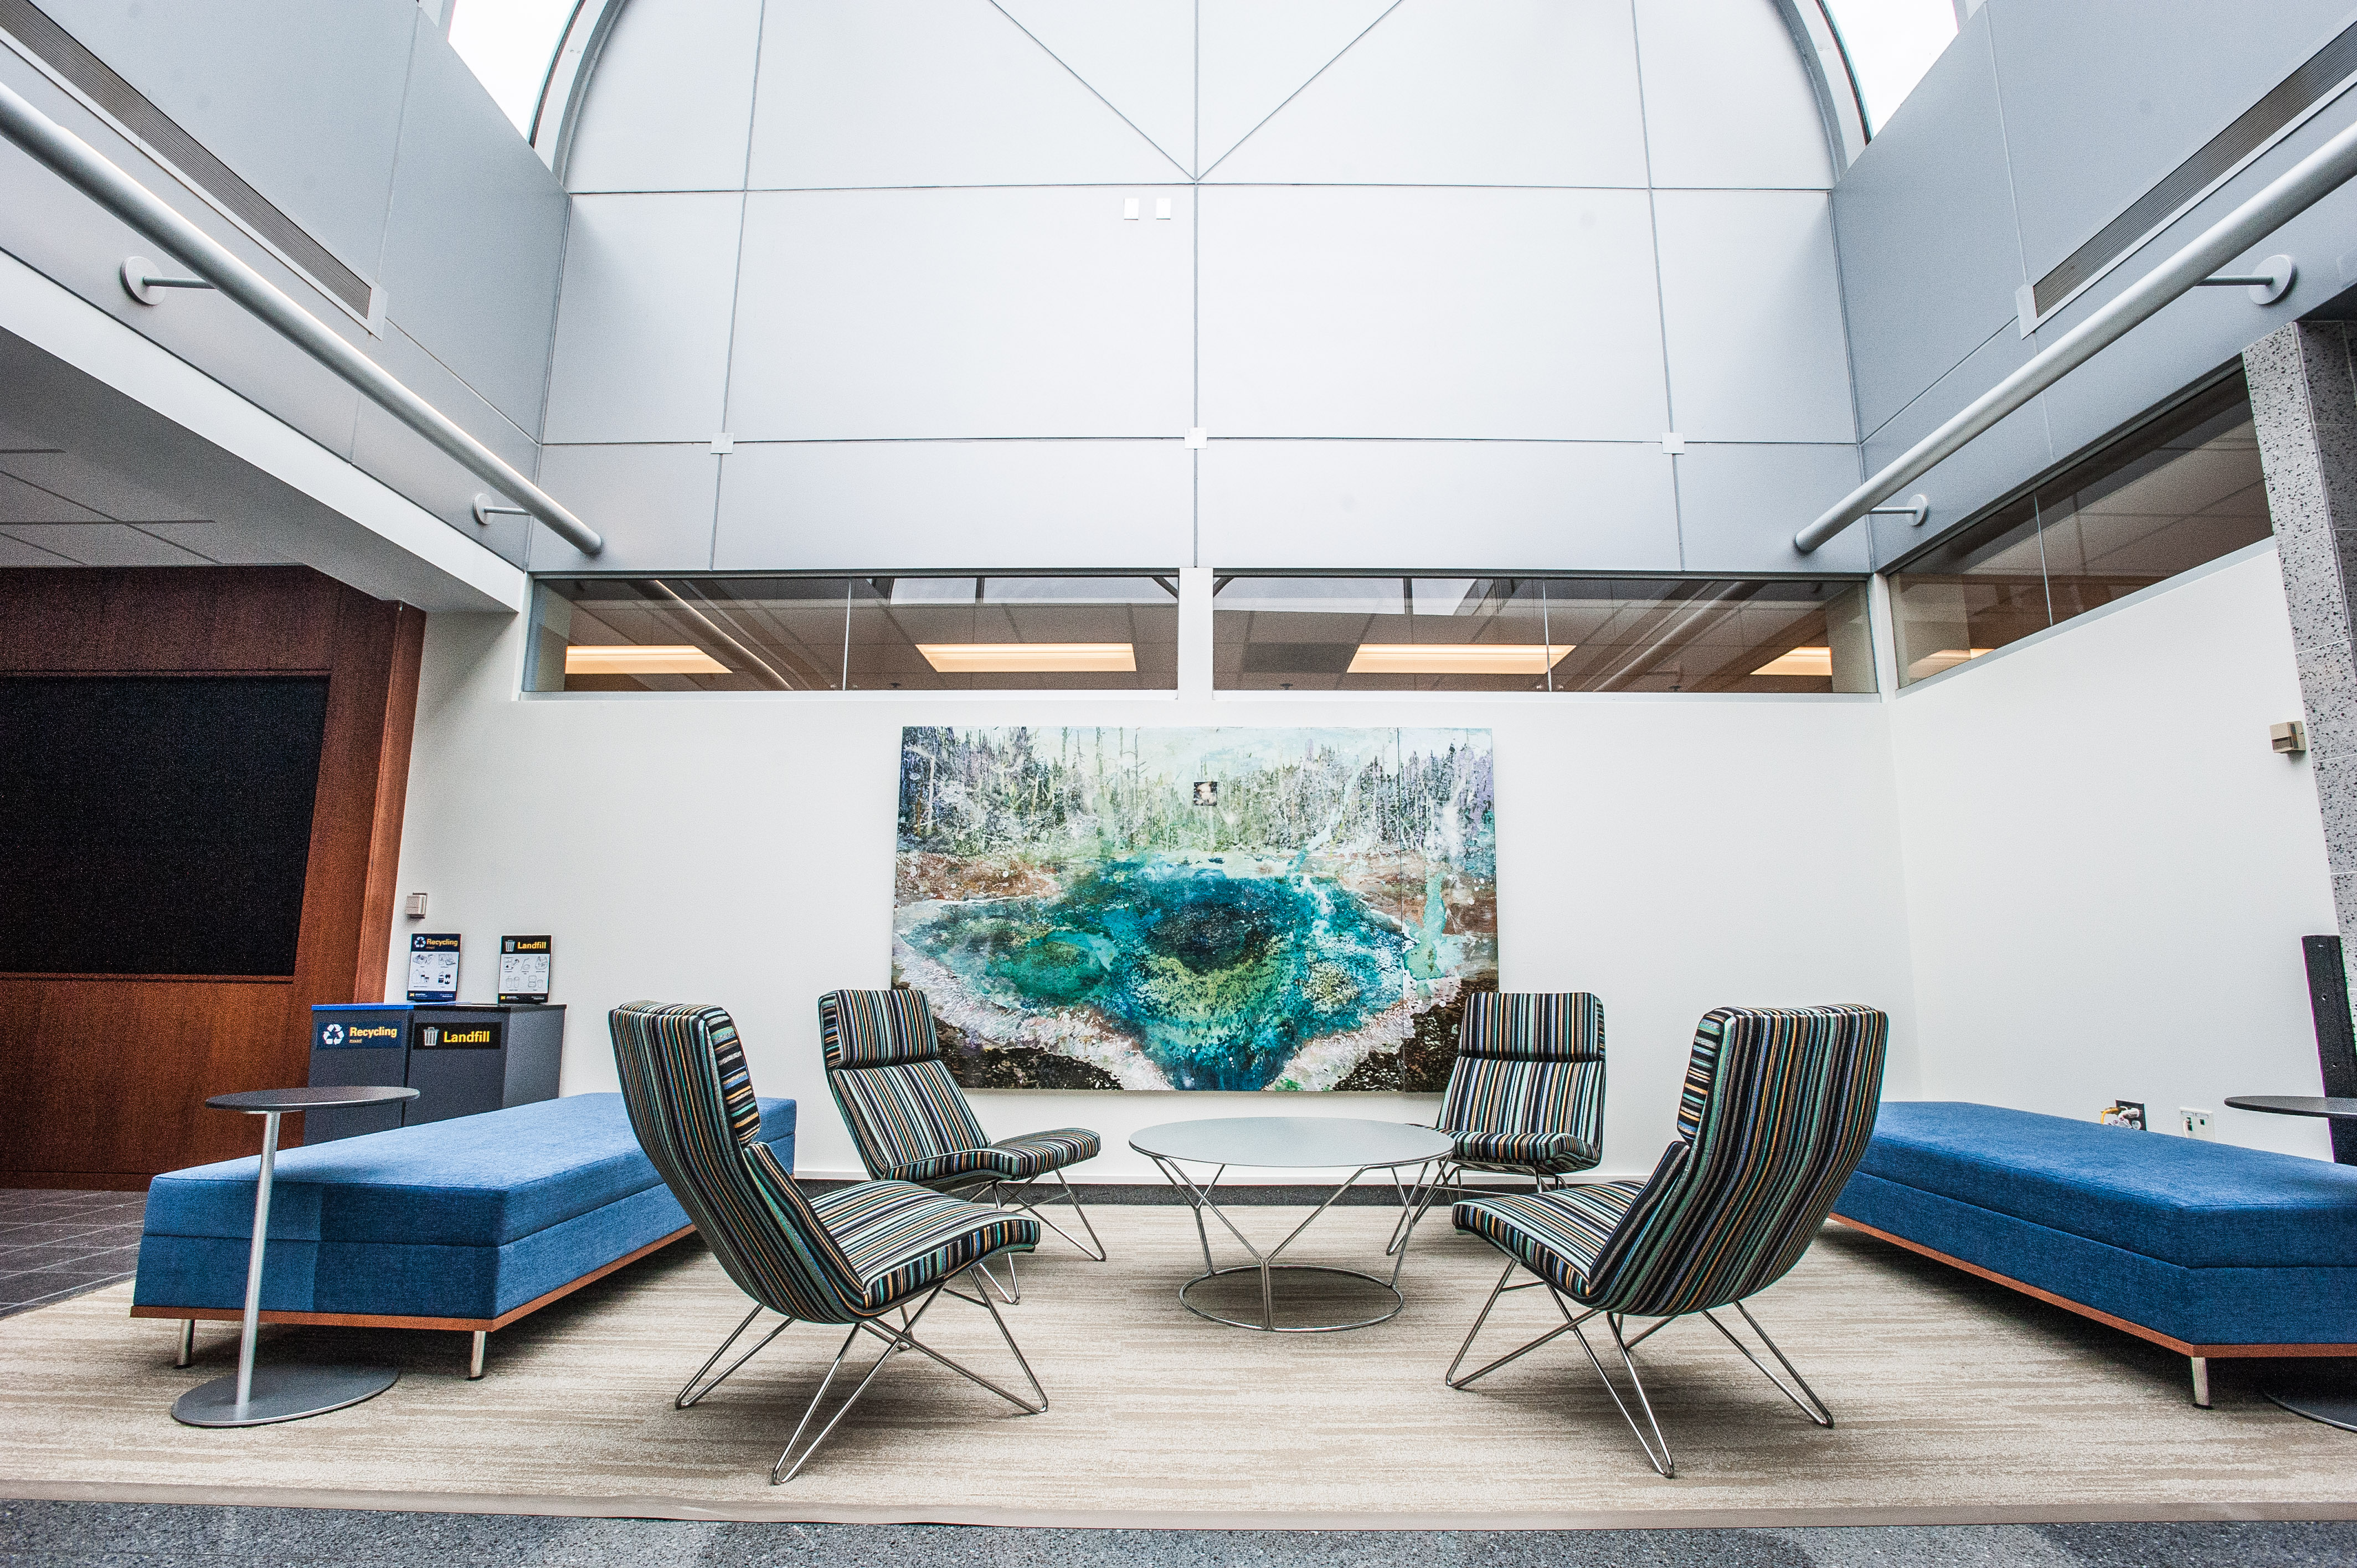 Collaborative space that welcomes all visitors at the entrance of the department.